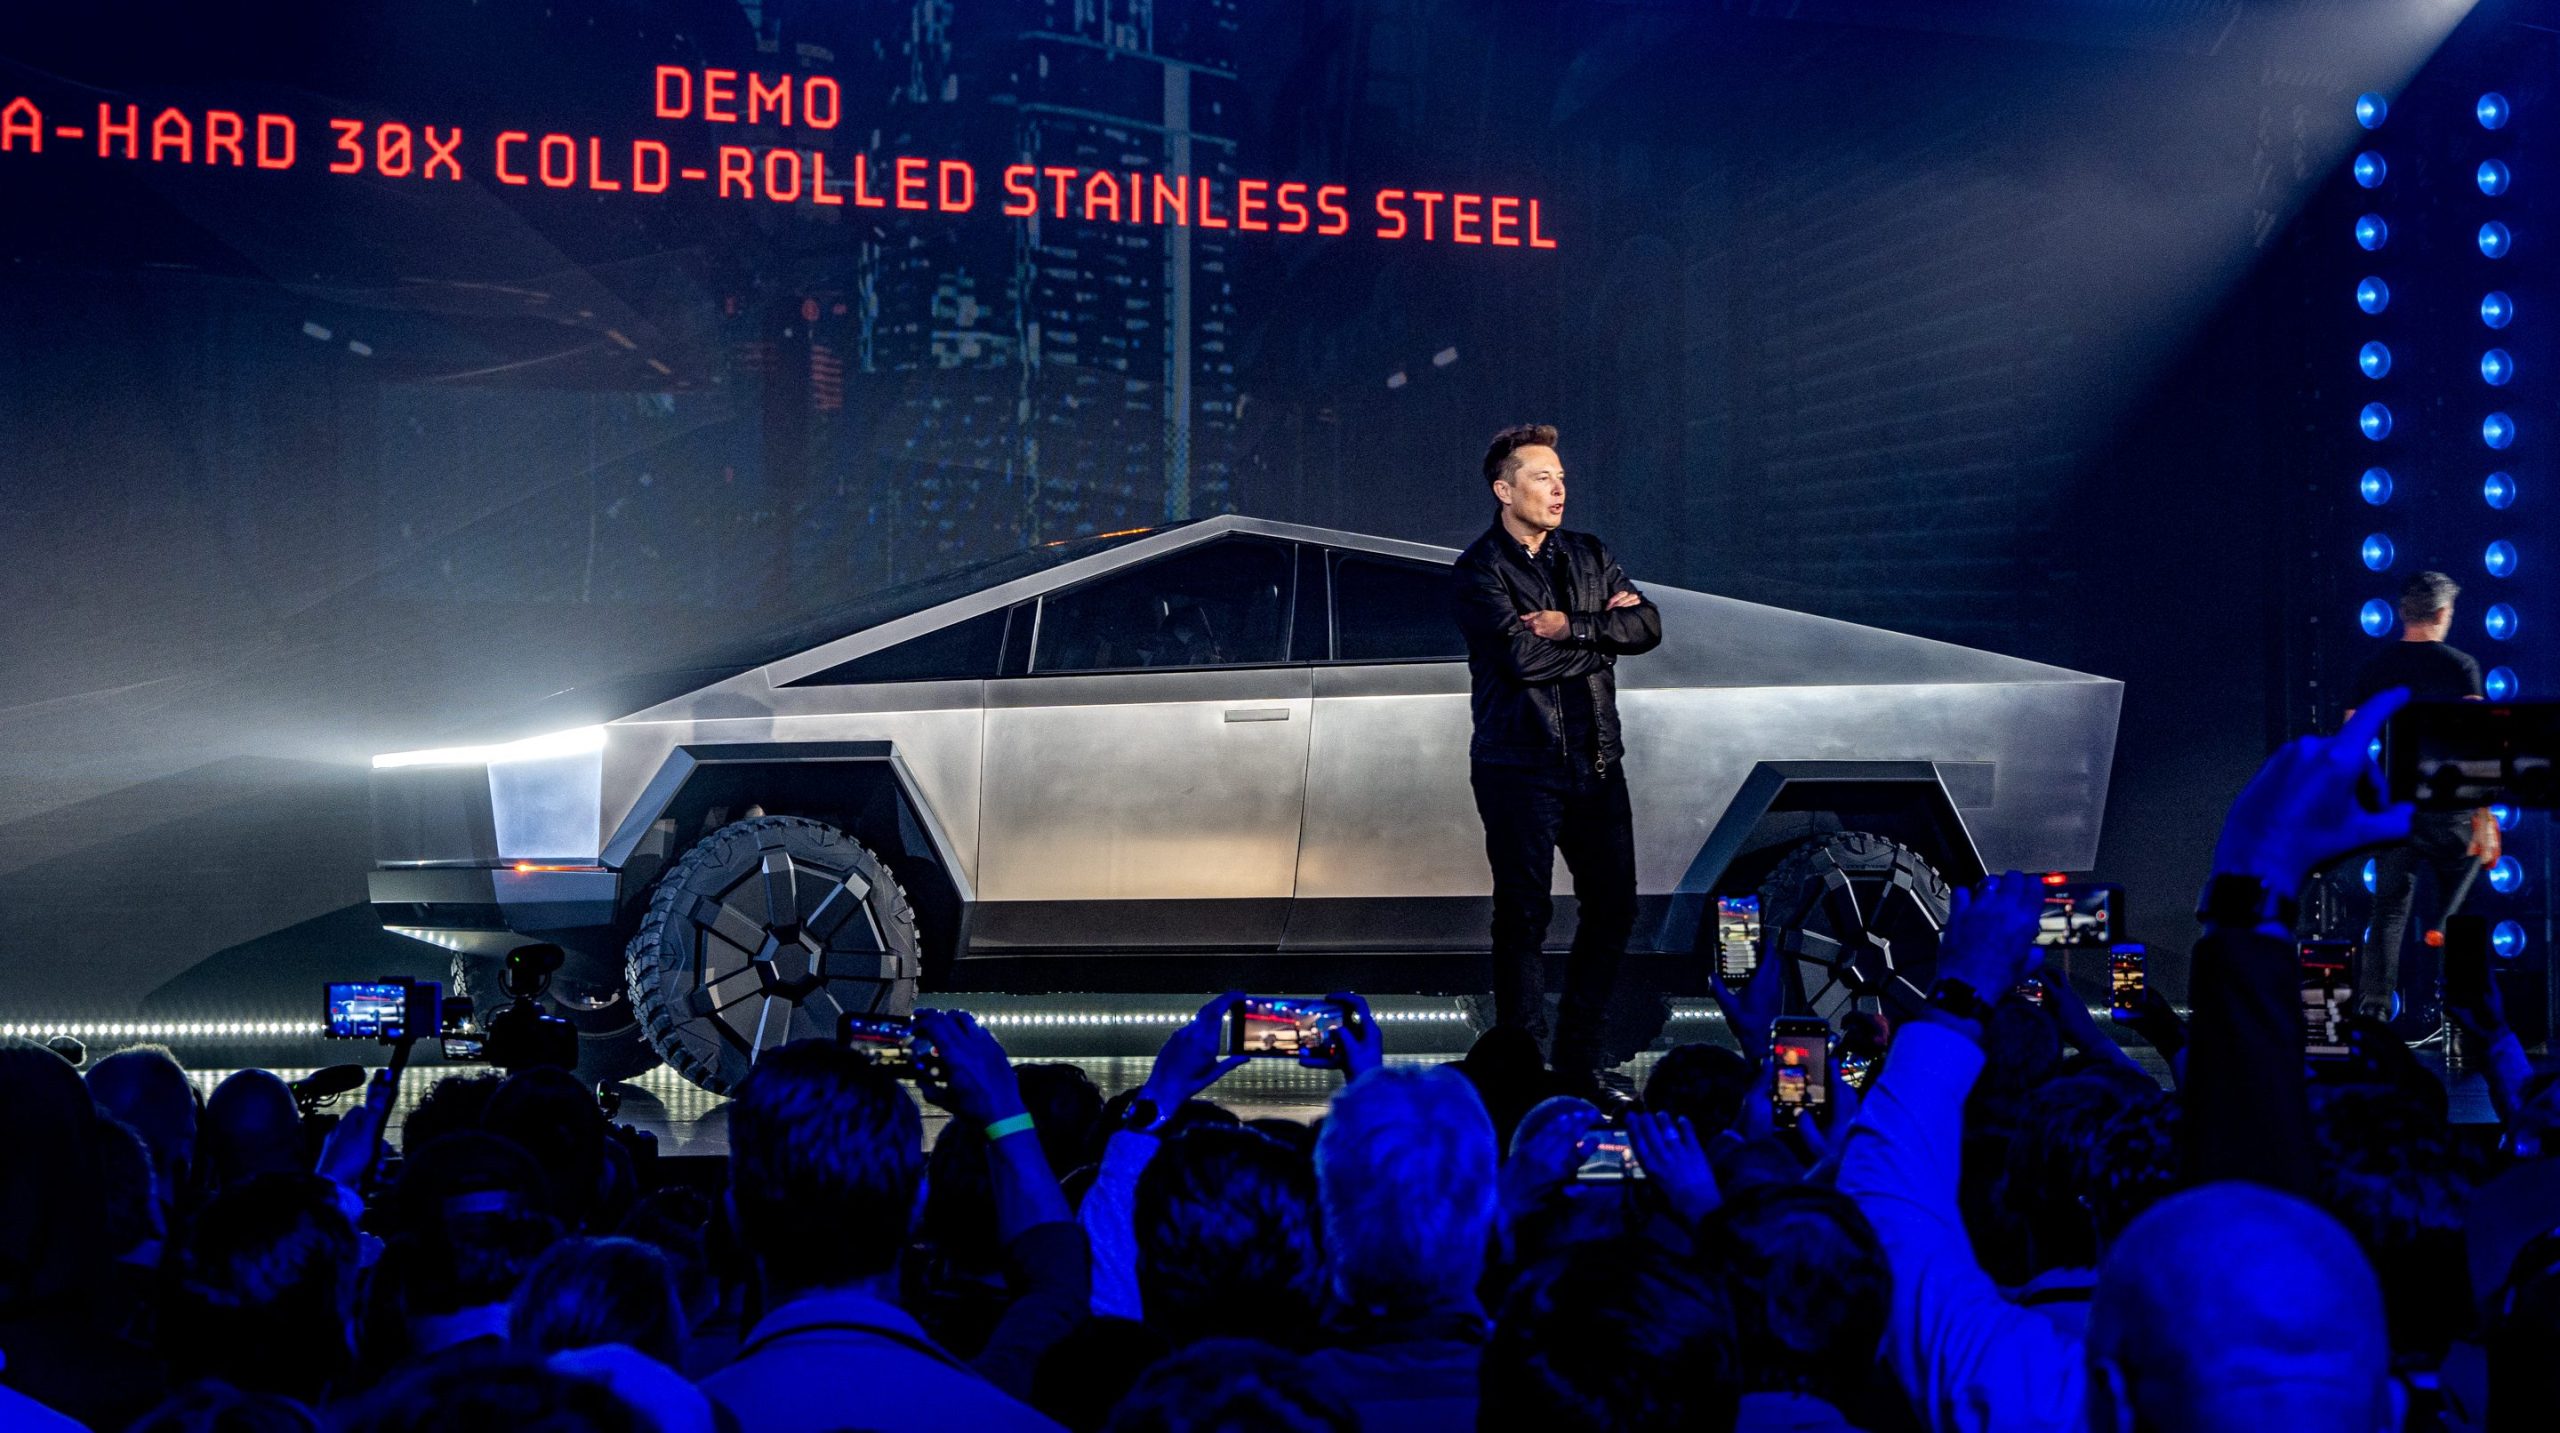 Tesla Cybertruck production is close new details from Elon Musk reveal